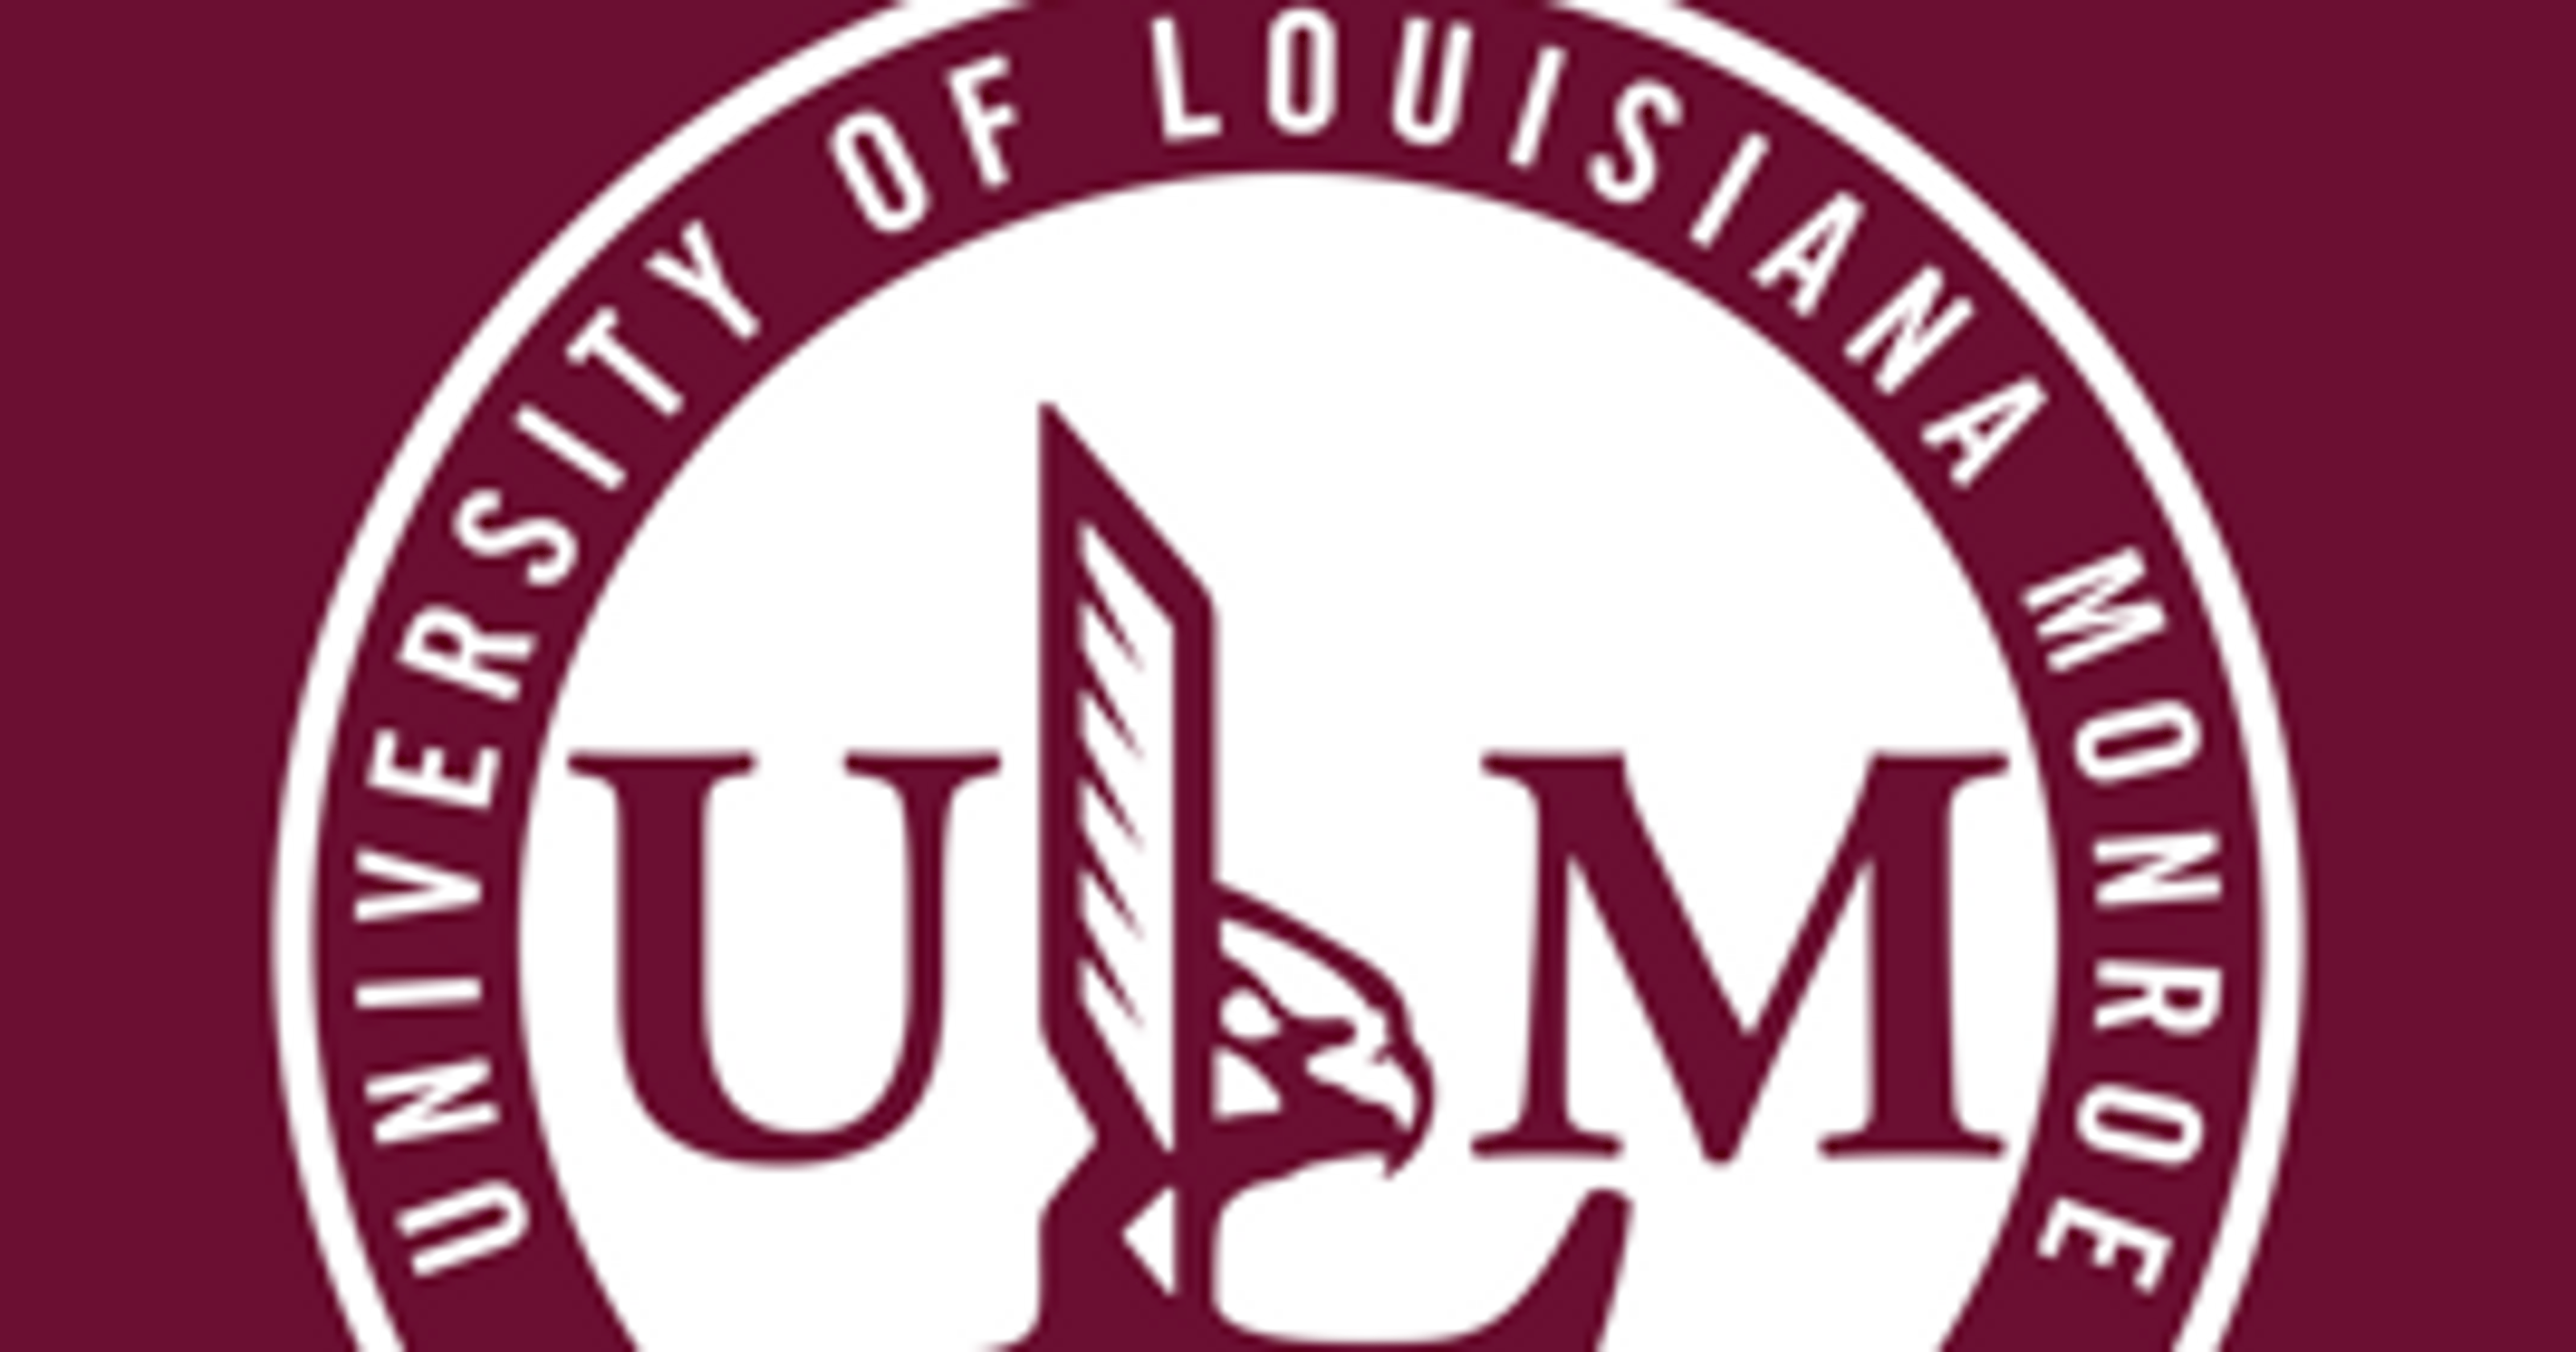 Warhawk Logo - ULM reveals new logo and 'The Best is on the Bayou'